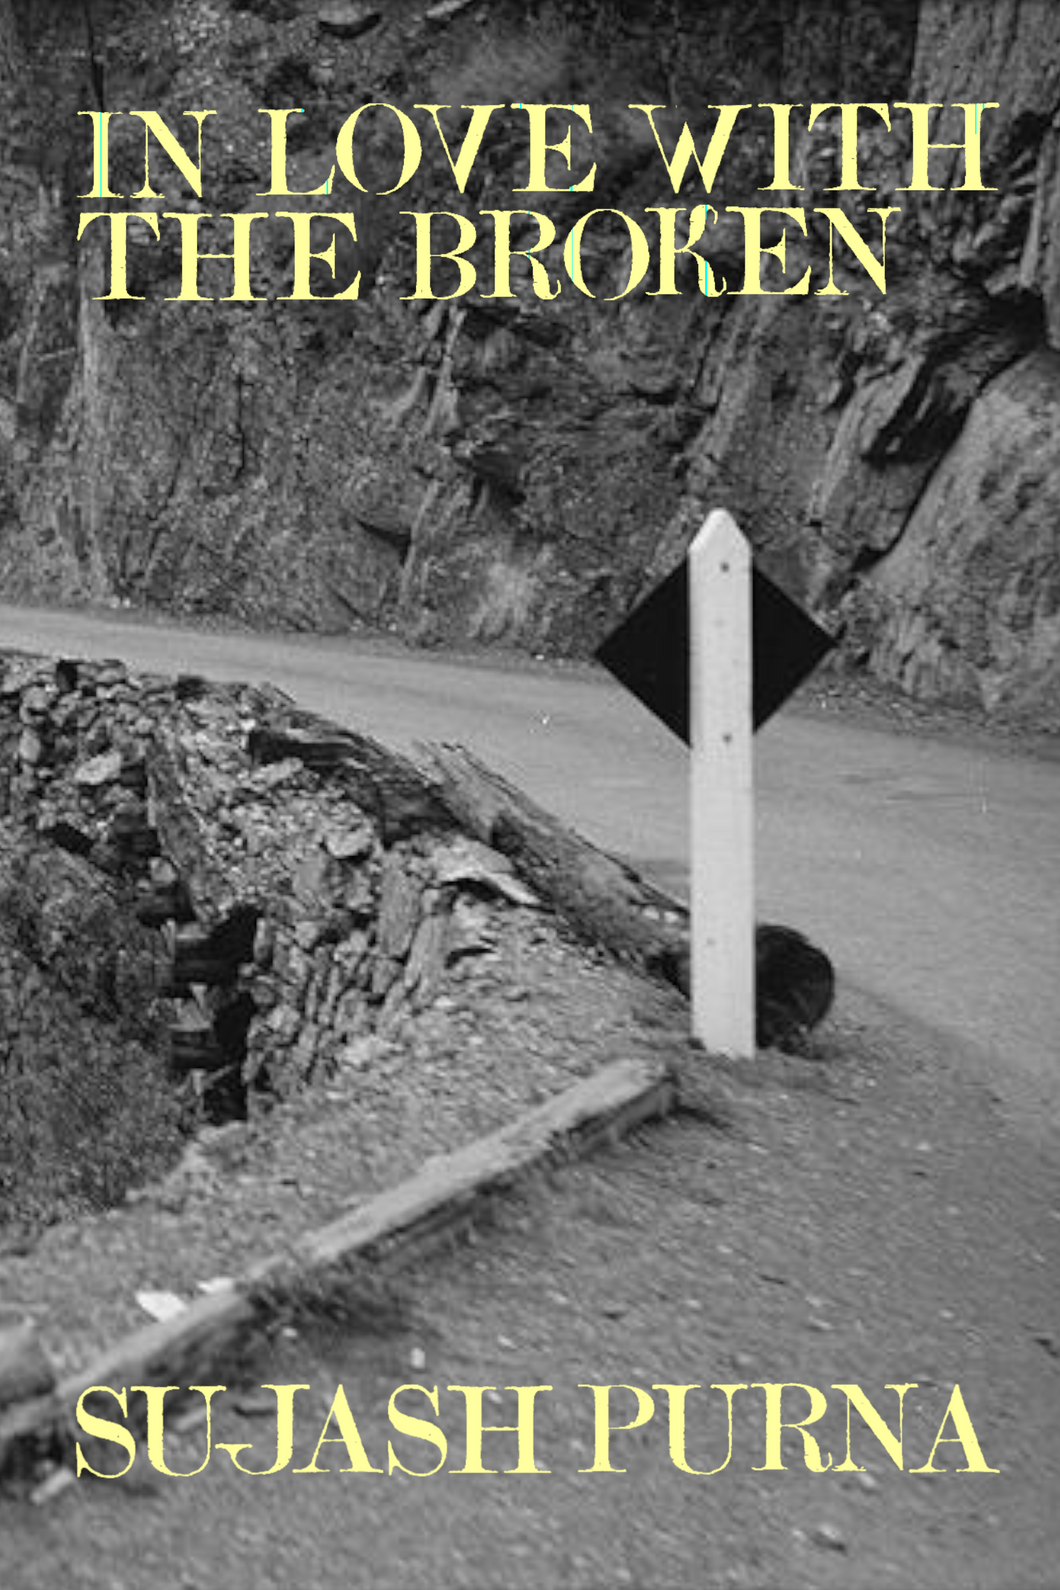 In Love with the Broken, by Sujash Purna-Print Books-Bottlecap Press